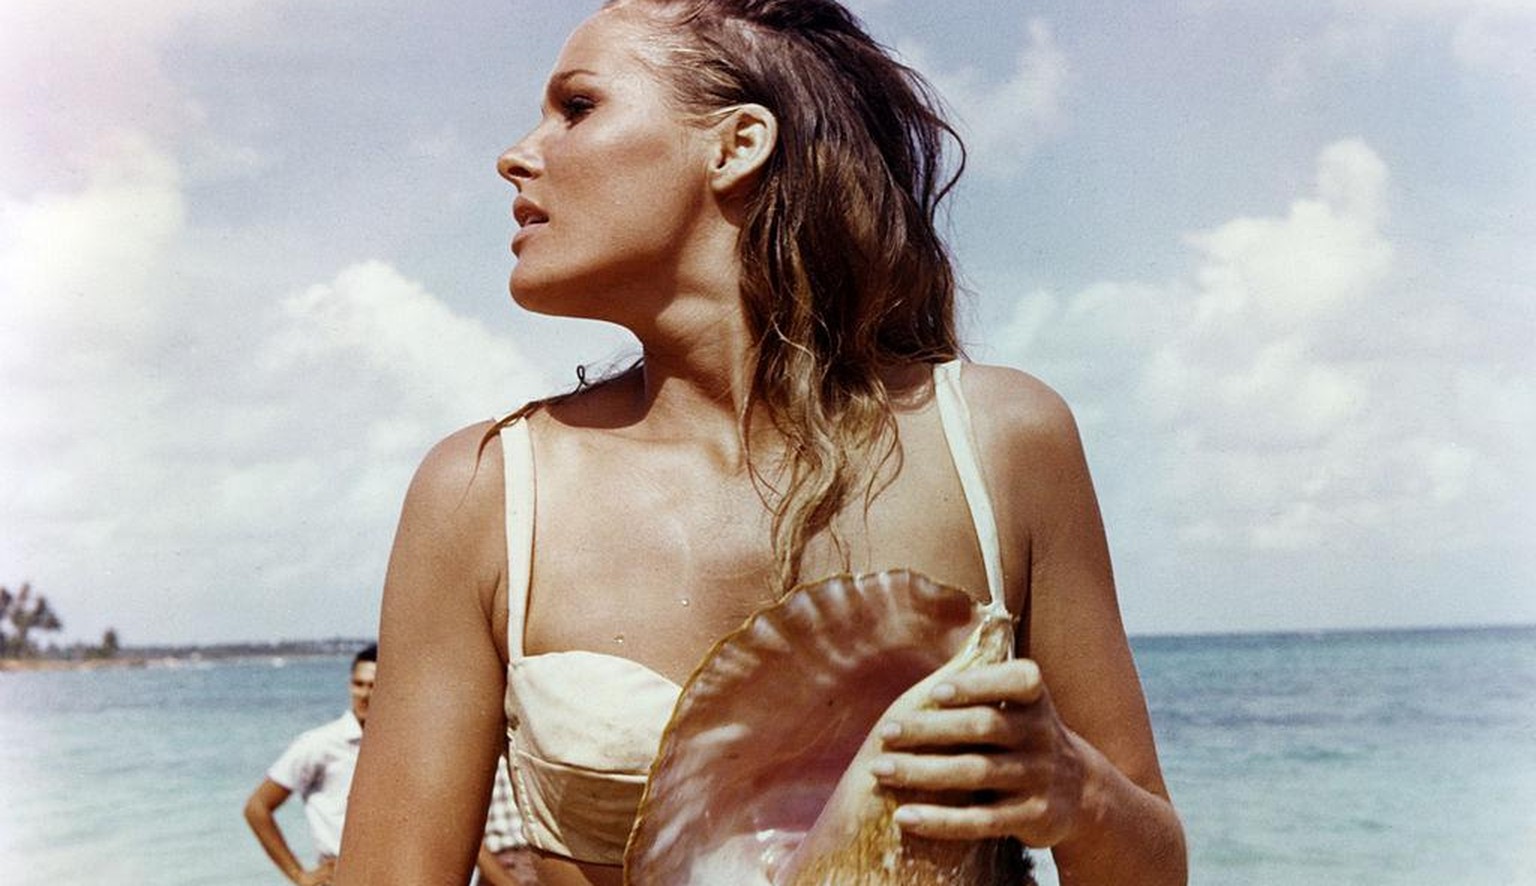 Ursula Andress, Swedish actress, wearing a white bikini and holding a conch shell in a publicity still issued for the film, &#039;Dr No&#039;, 1962. The James Bond film, directed by Terence Young (191 ...